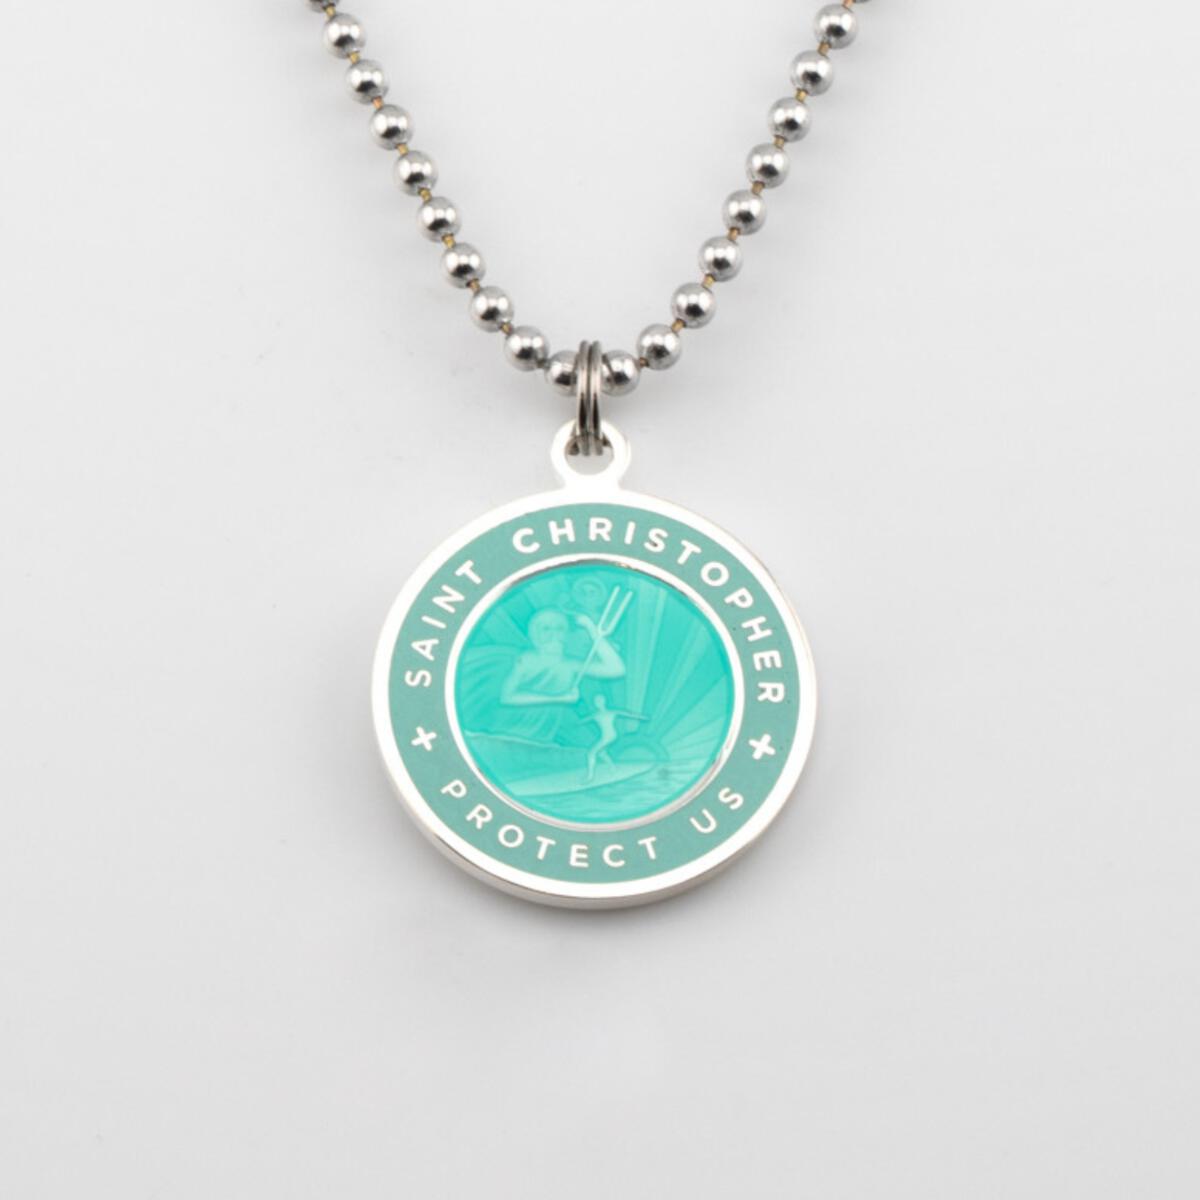 St. Christopher Large Necklace